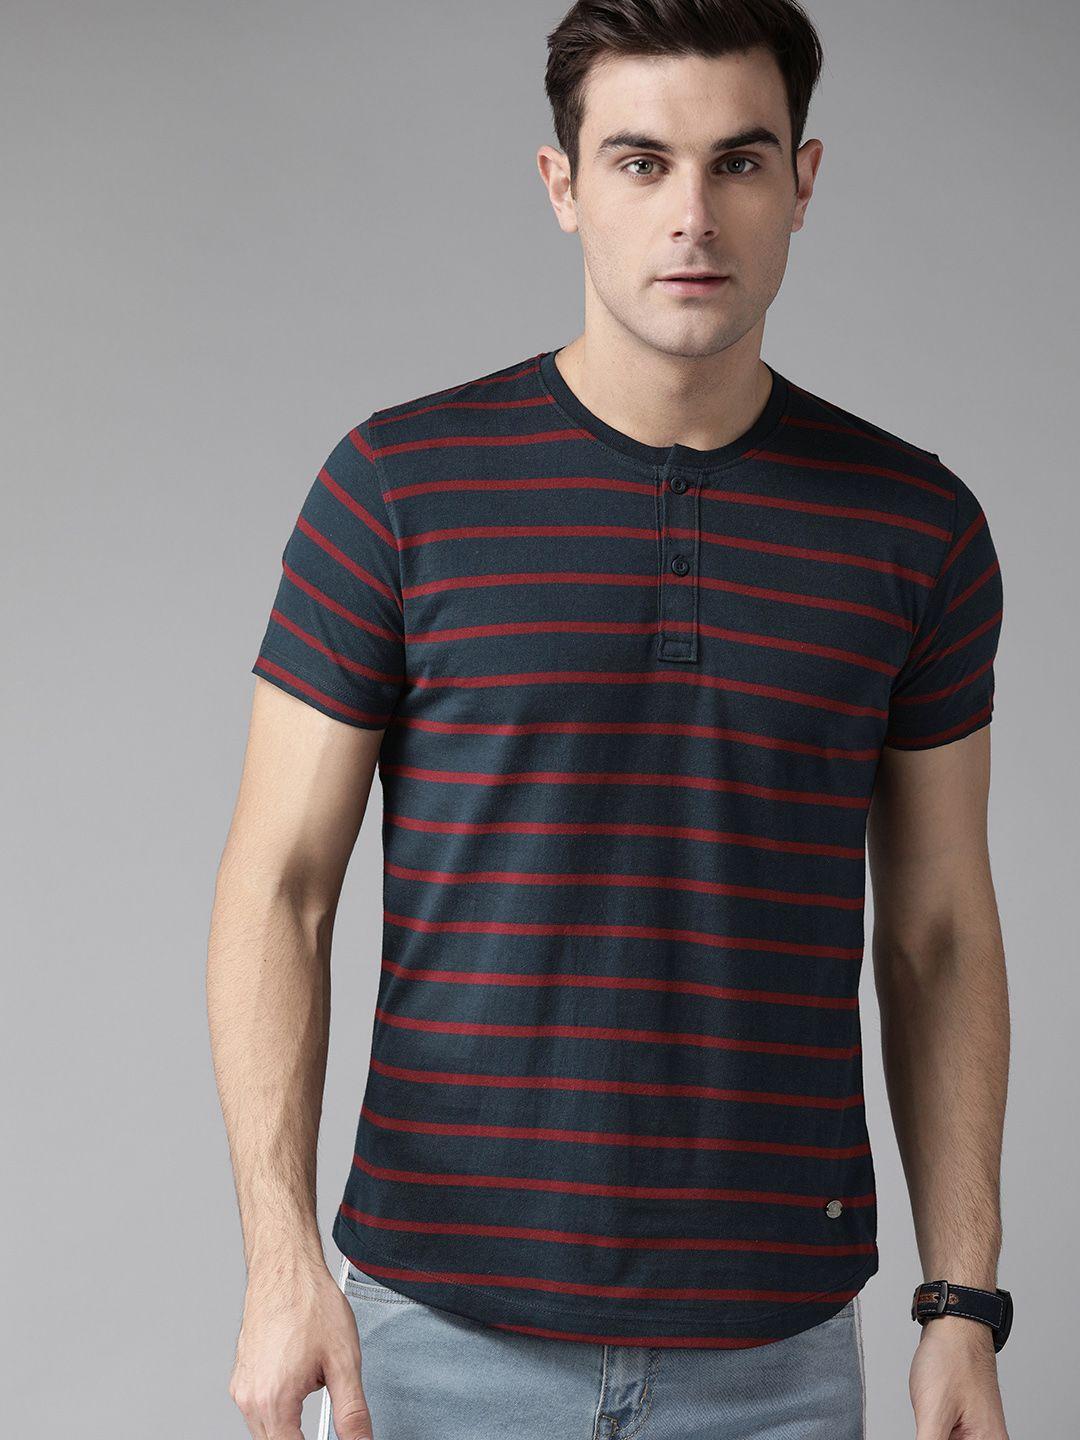 the roadster lifestyle co men navy blue  maroon striped henley neck pure cotton t-shirt